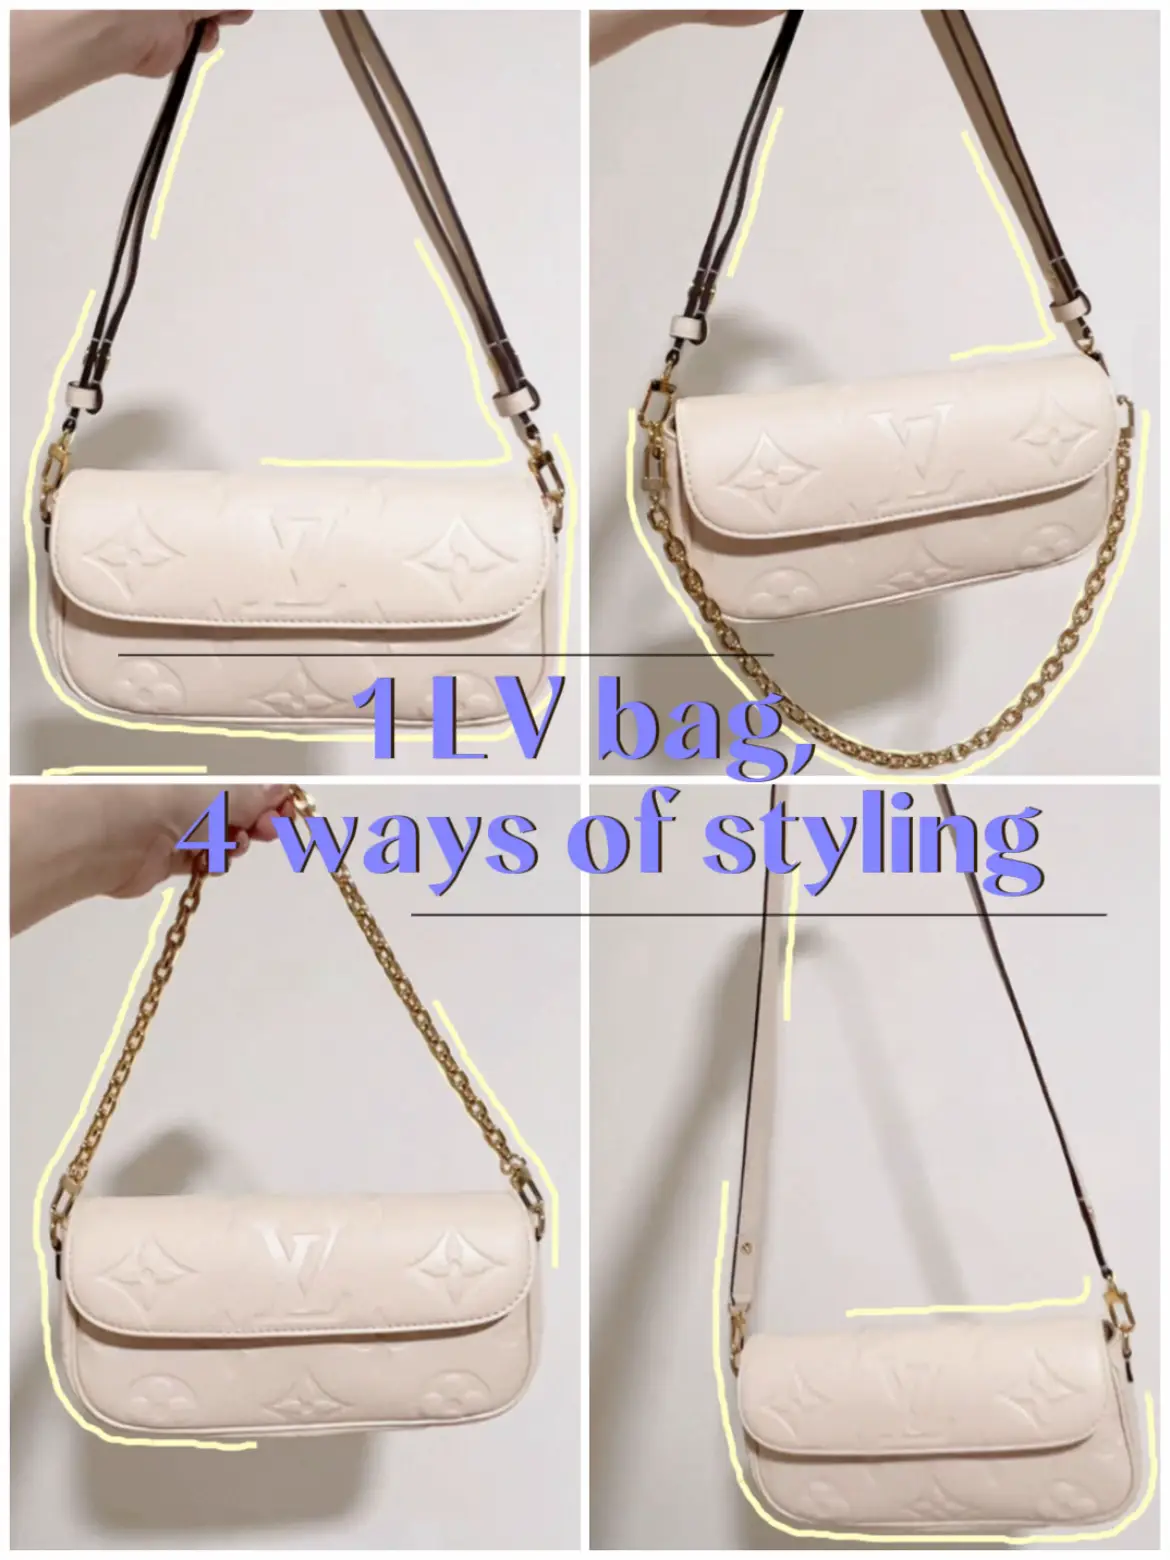 LV Wallet On Chain Ivy vs Lily 